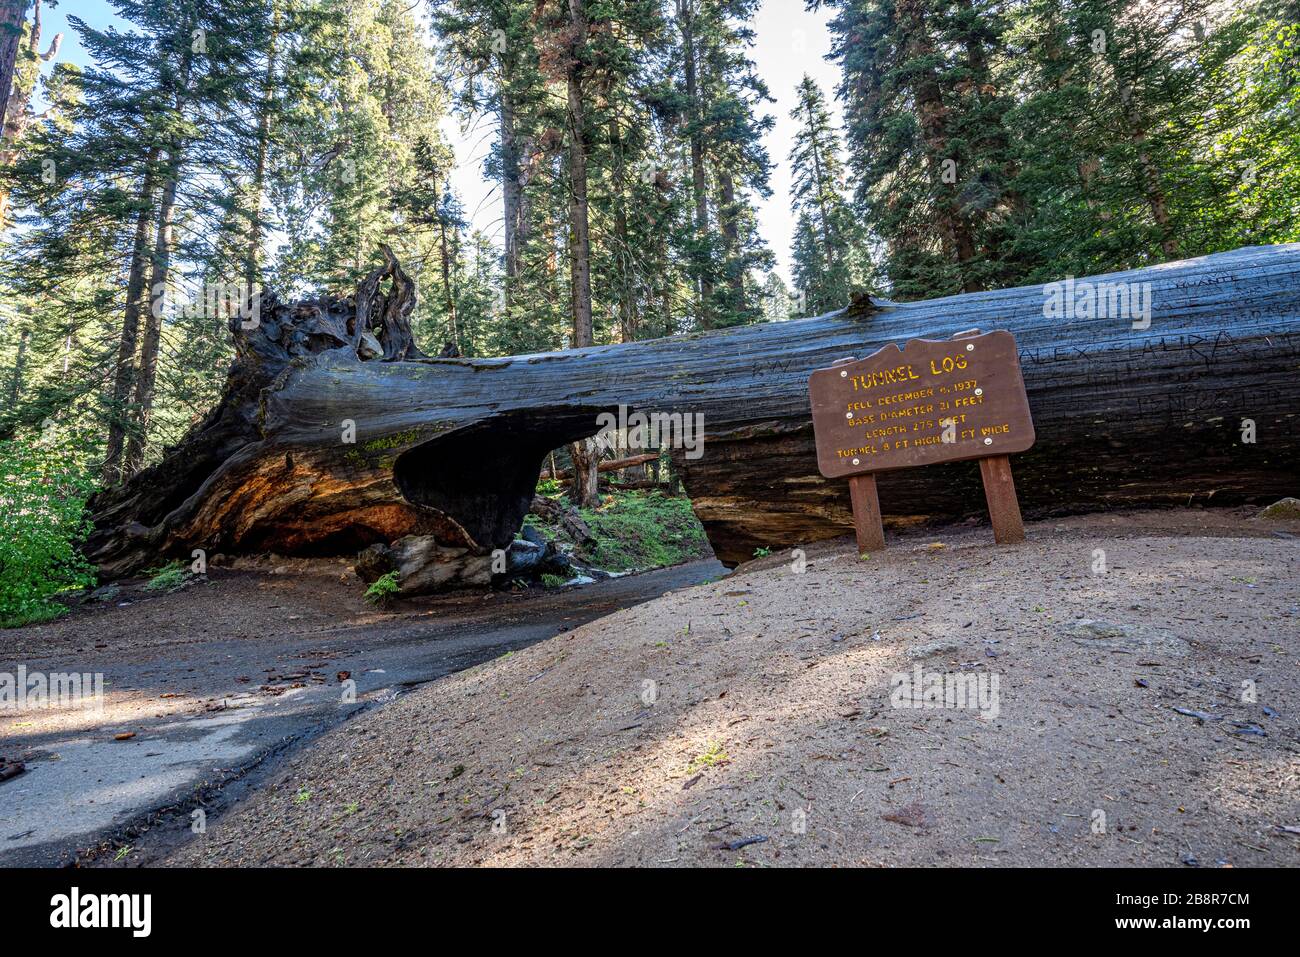 The tunnel log in Sequoia National Park was carved in 1938 from a fallen sequoia and has been open to traffic since. Stock Photo